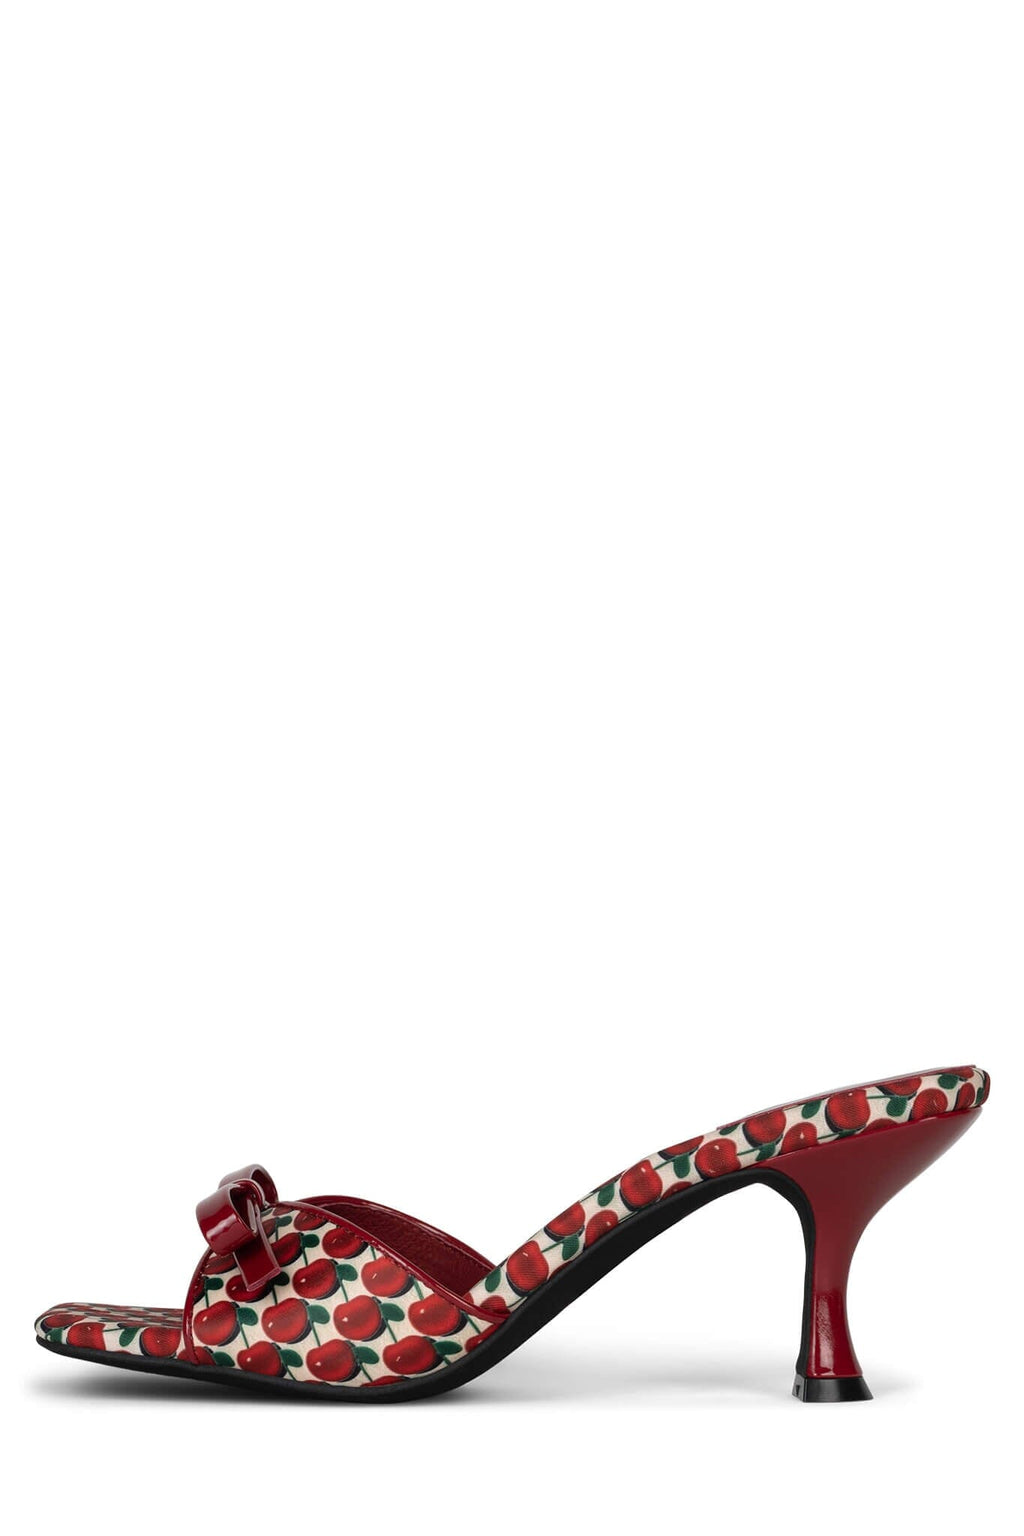 SWEET-ON-U Jeffrey Campbell Heeled Sandals Red Cherry Combo